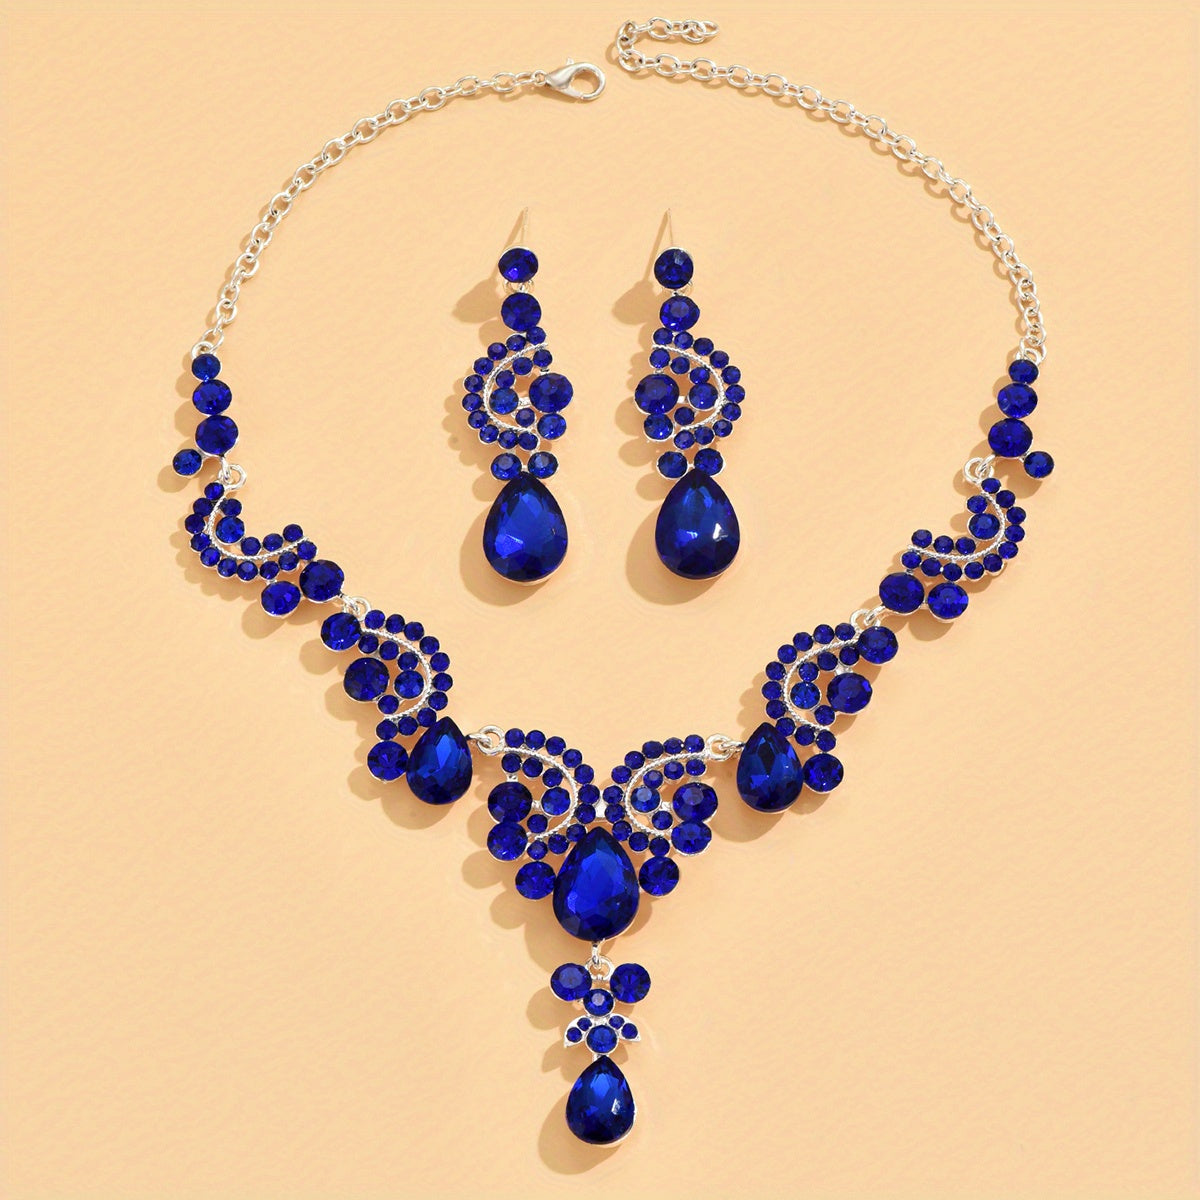 Shimmering Synthetic Gemstone Pendant Necklace and Dangle Earrings Jewelry Set